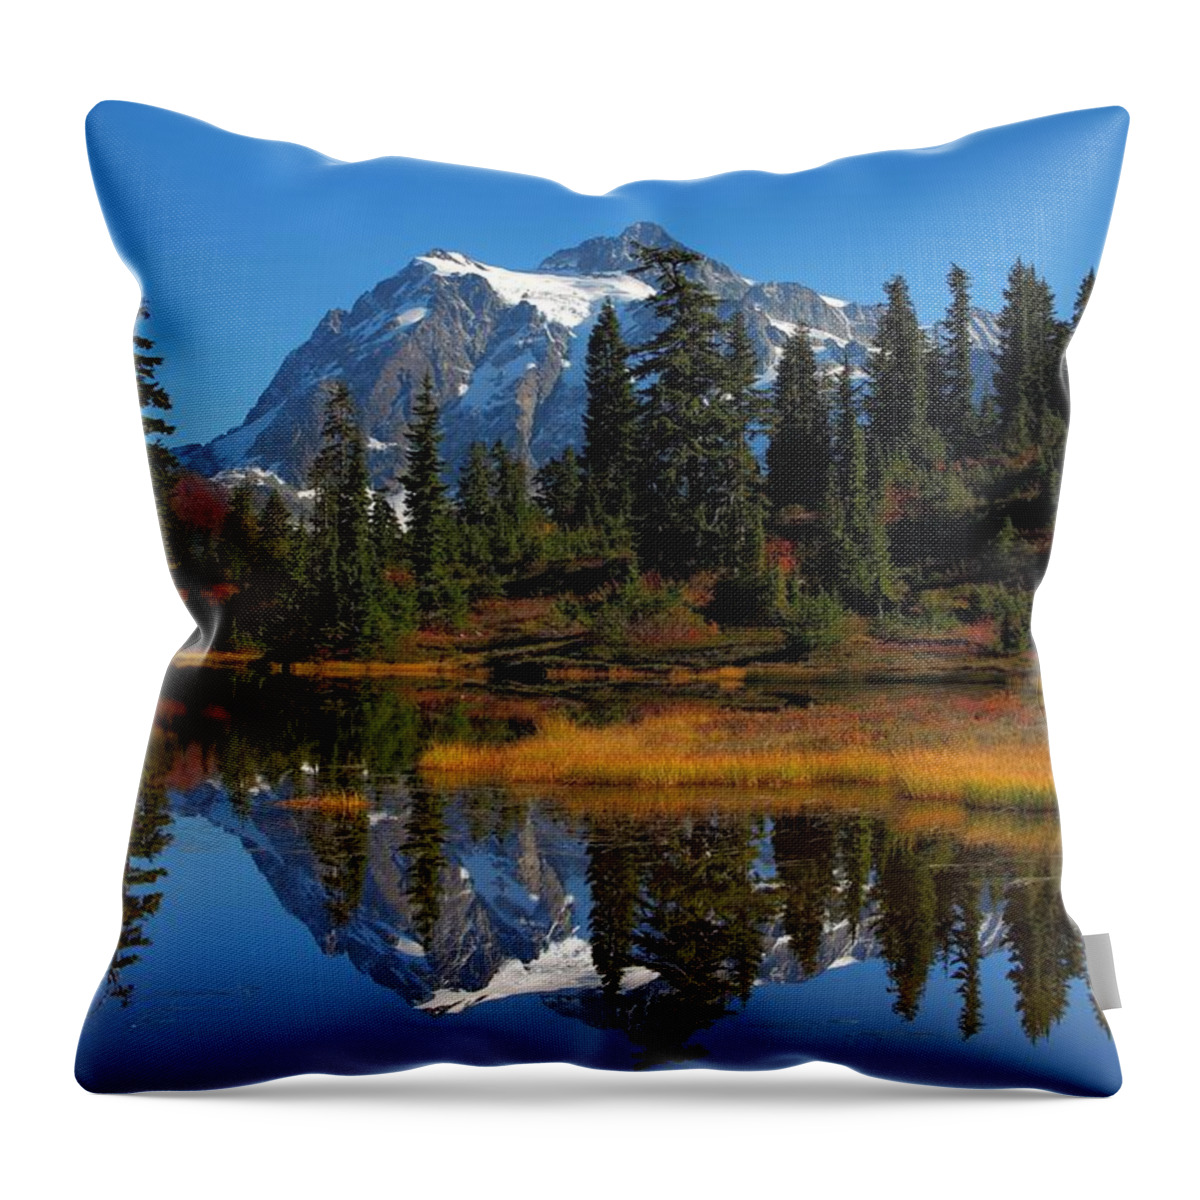 Tranquility Throw Pillow featuring the photograph Mt. Shuksan Reflection by Jonkman Photography